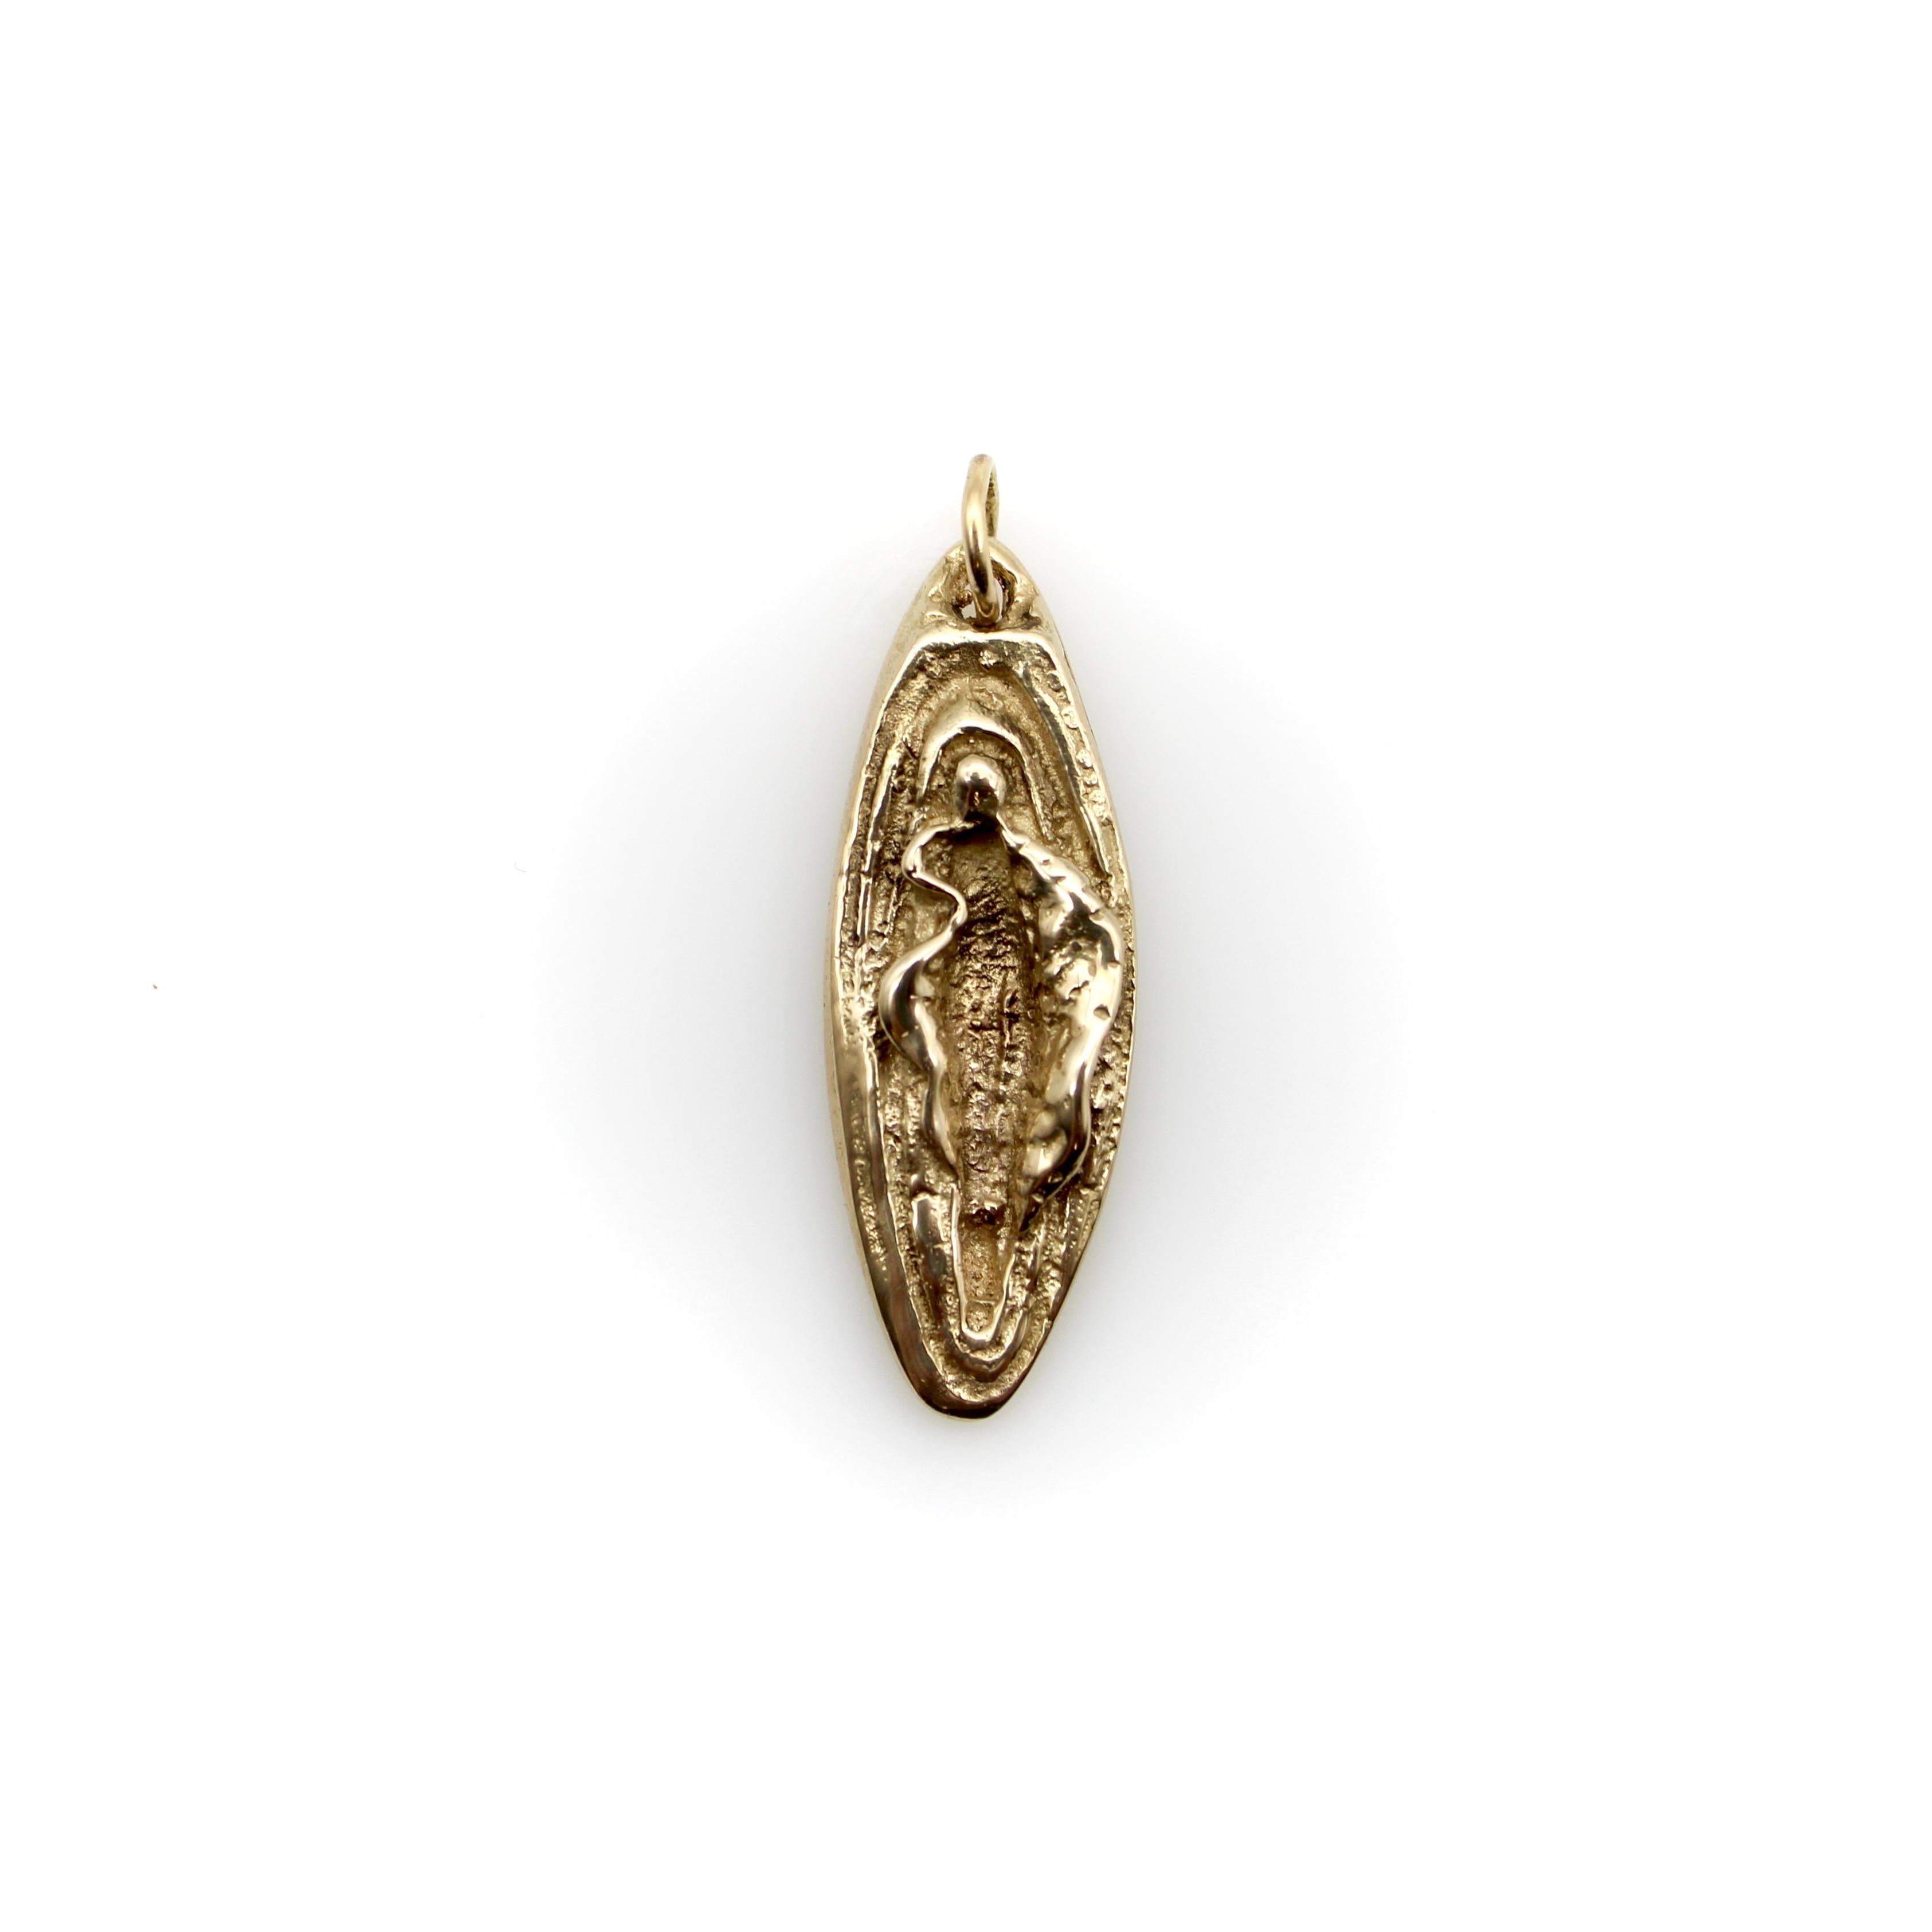 This 14k gold vulva pendant is the perfect symbol of empowerment. It can be worn as a powerful symbol of womanhood, with many interpretations to its meaning—a woman’s right to her own body, women’s healthcare issues, the power of a life giving